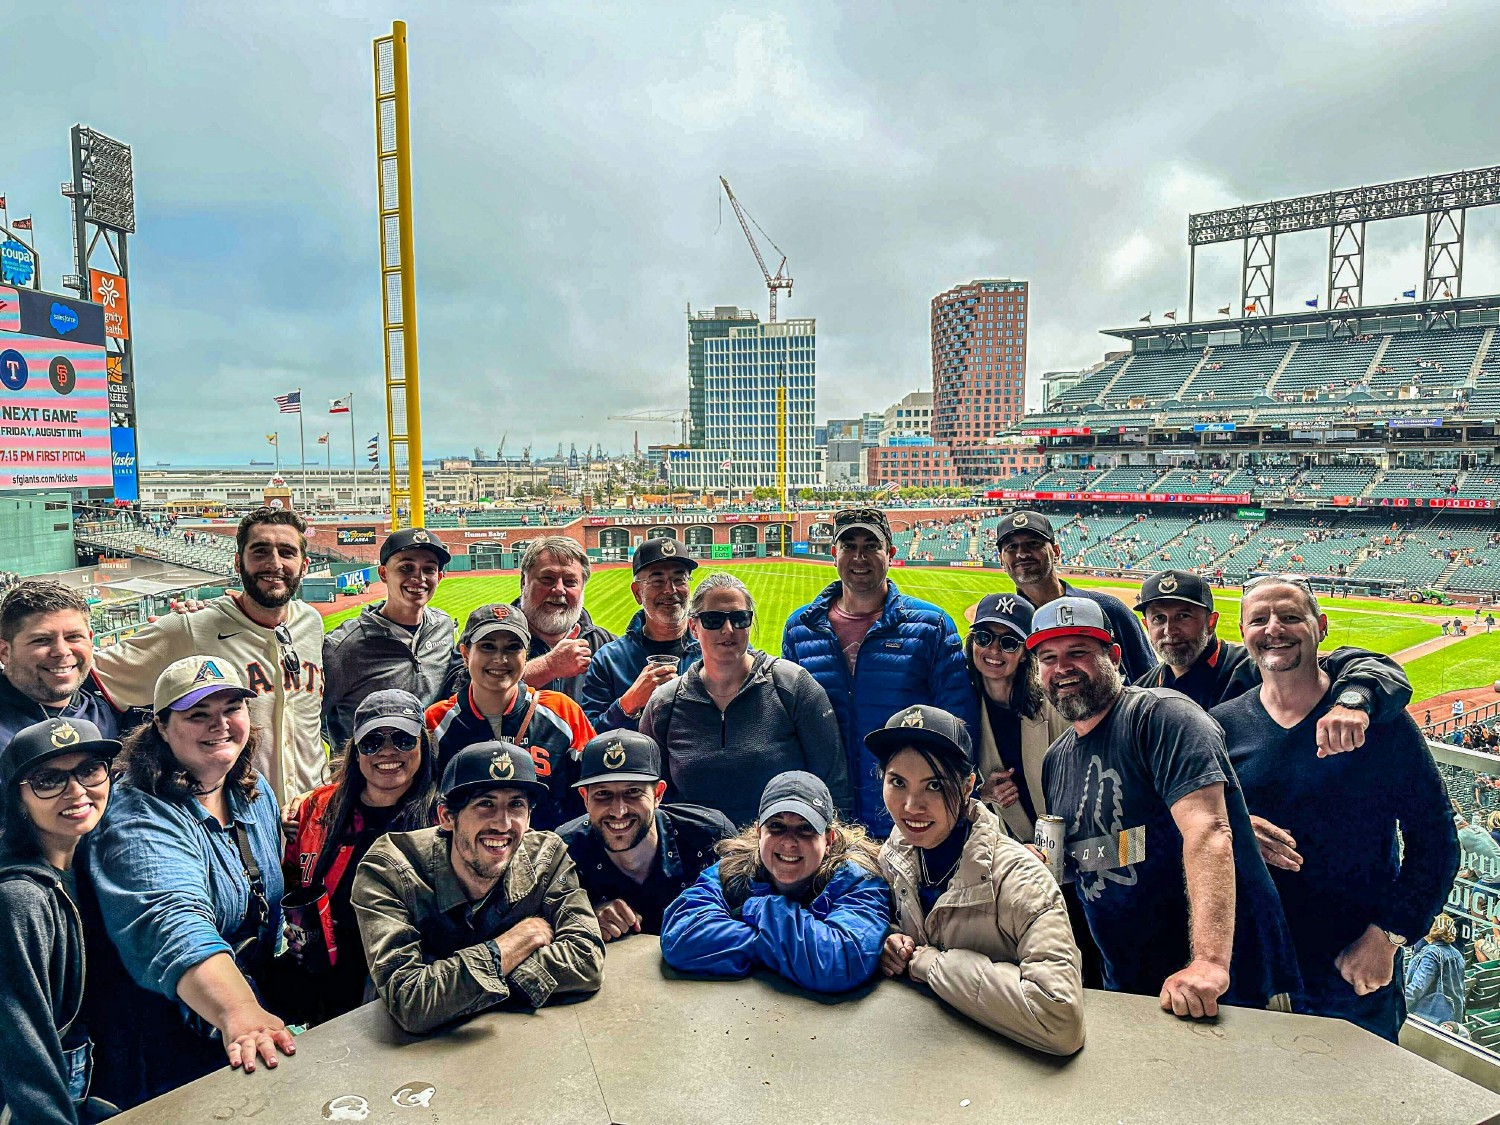 Members of our team attending a Giants game in San Francisco.